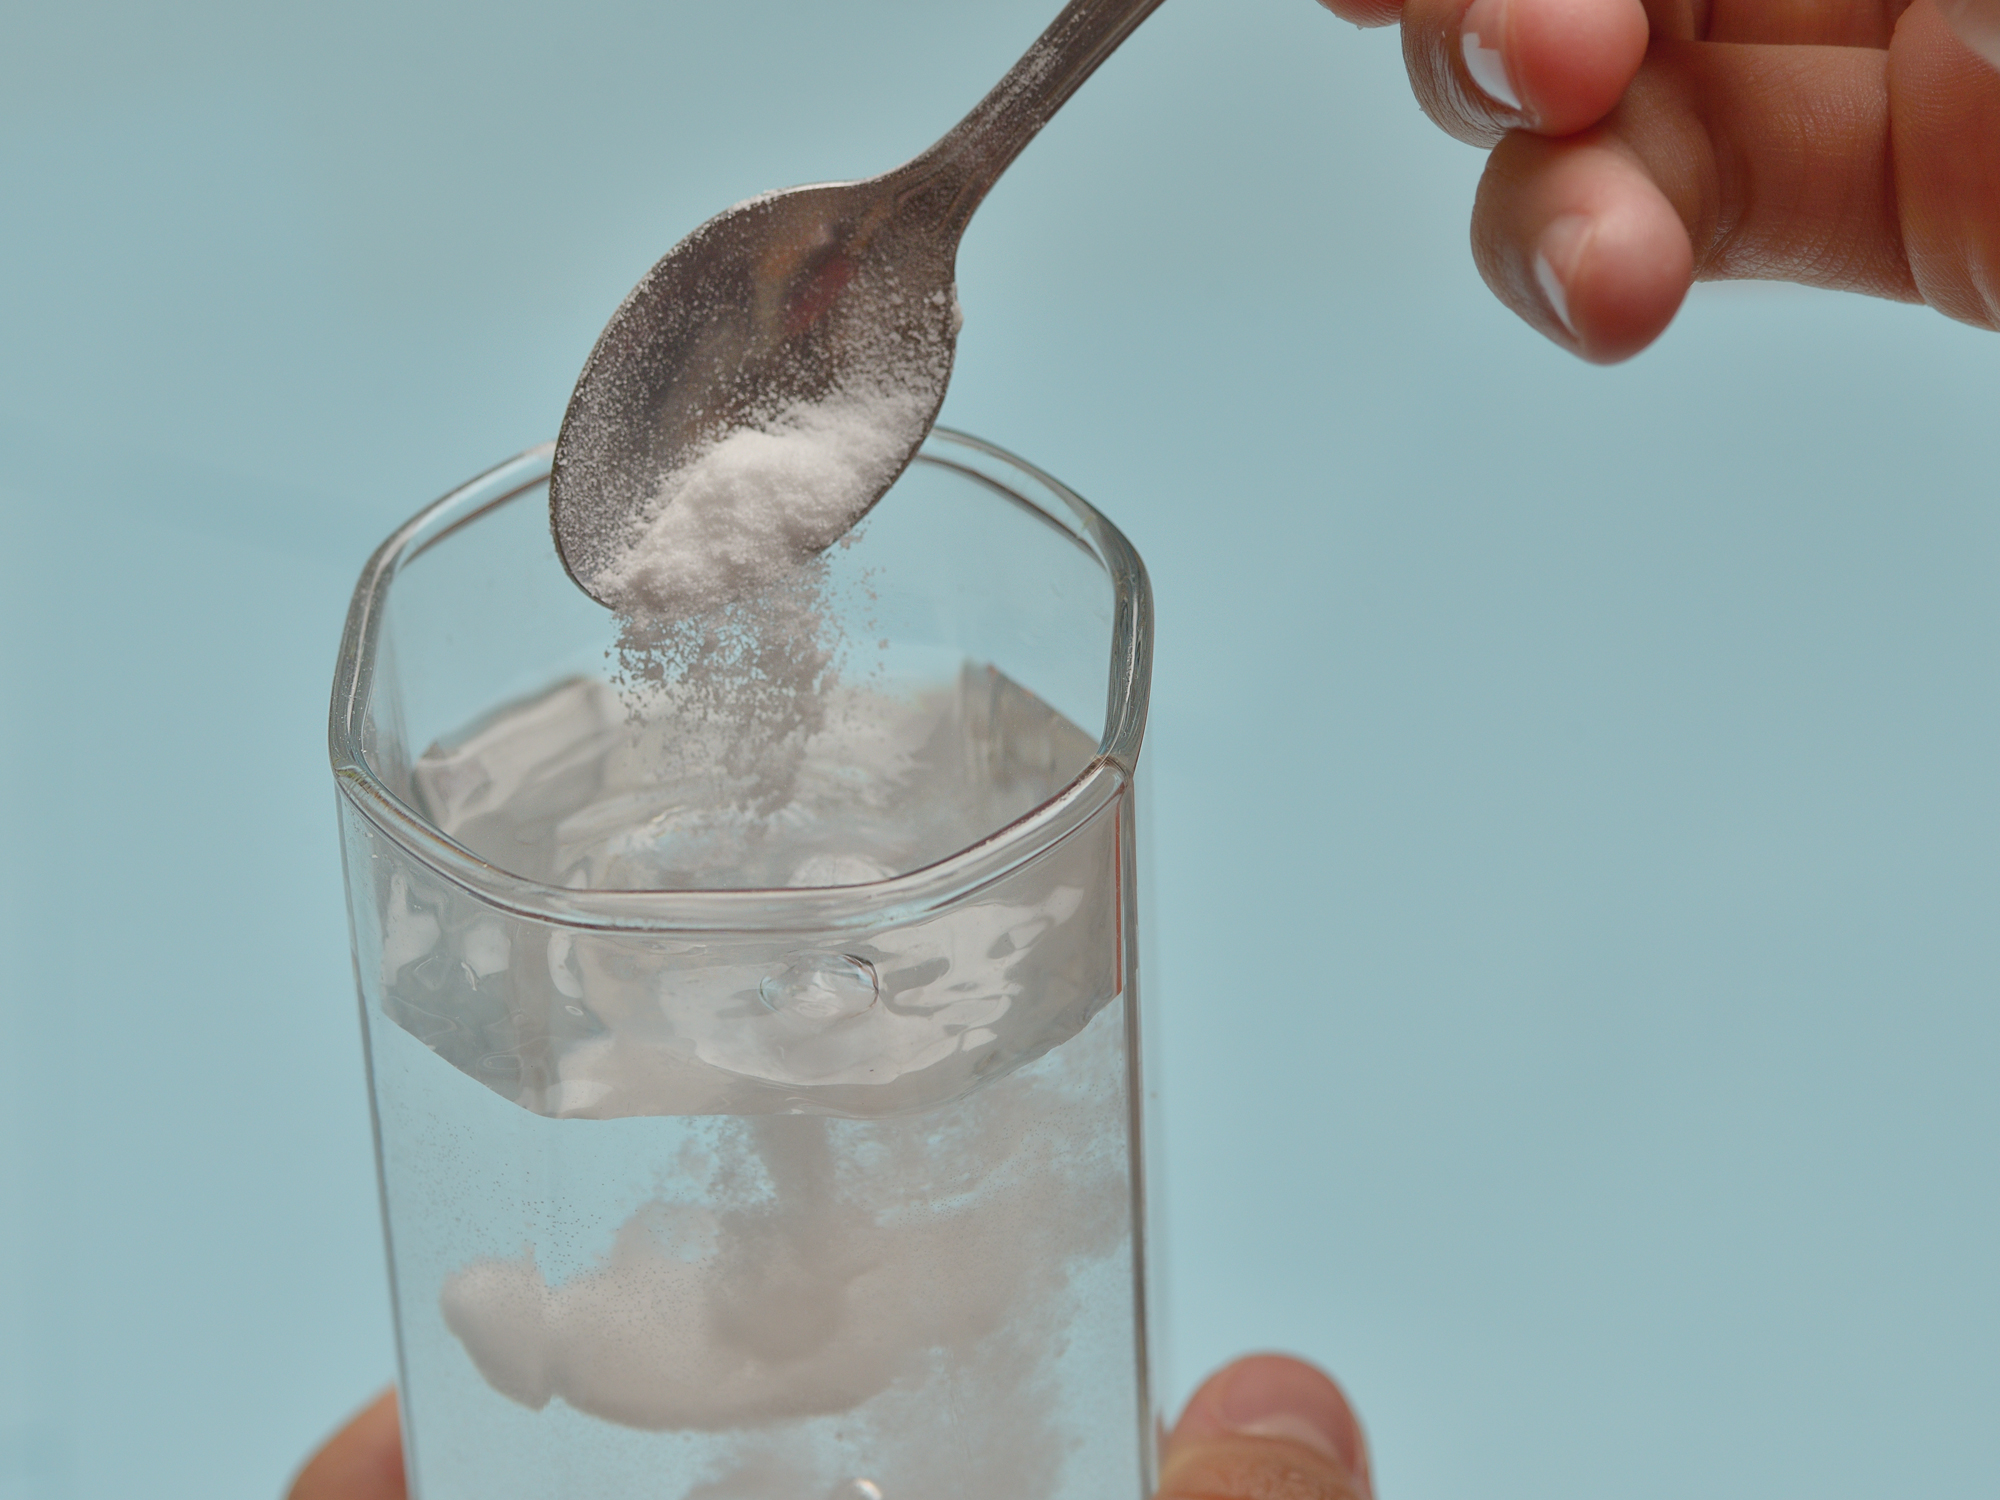 Is baking soda the key to managing autoimmune conditions?